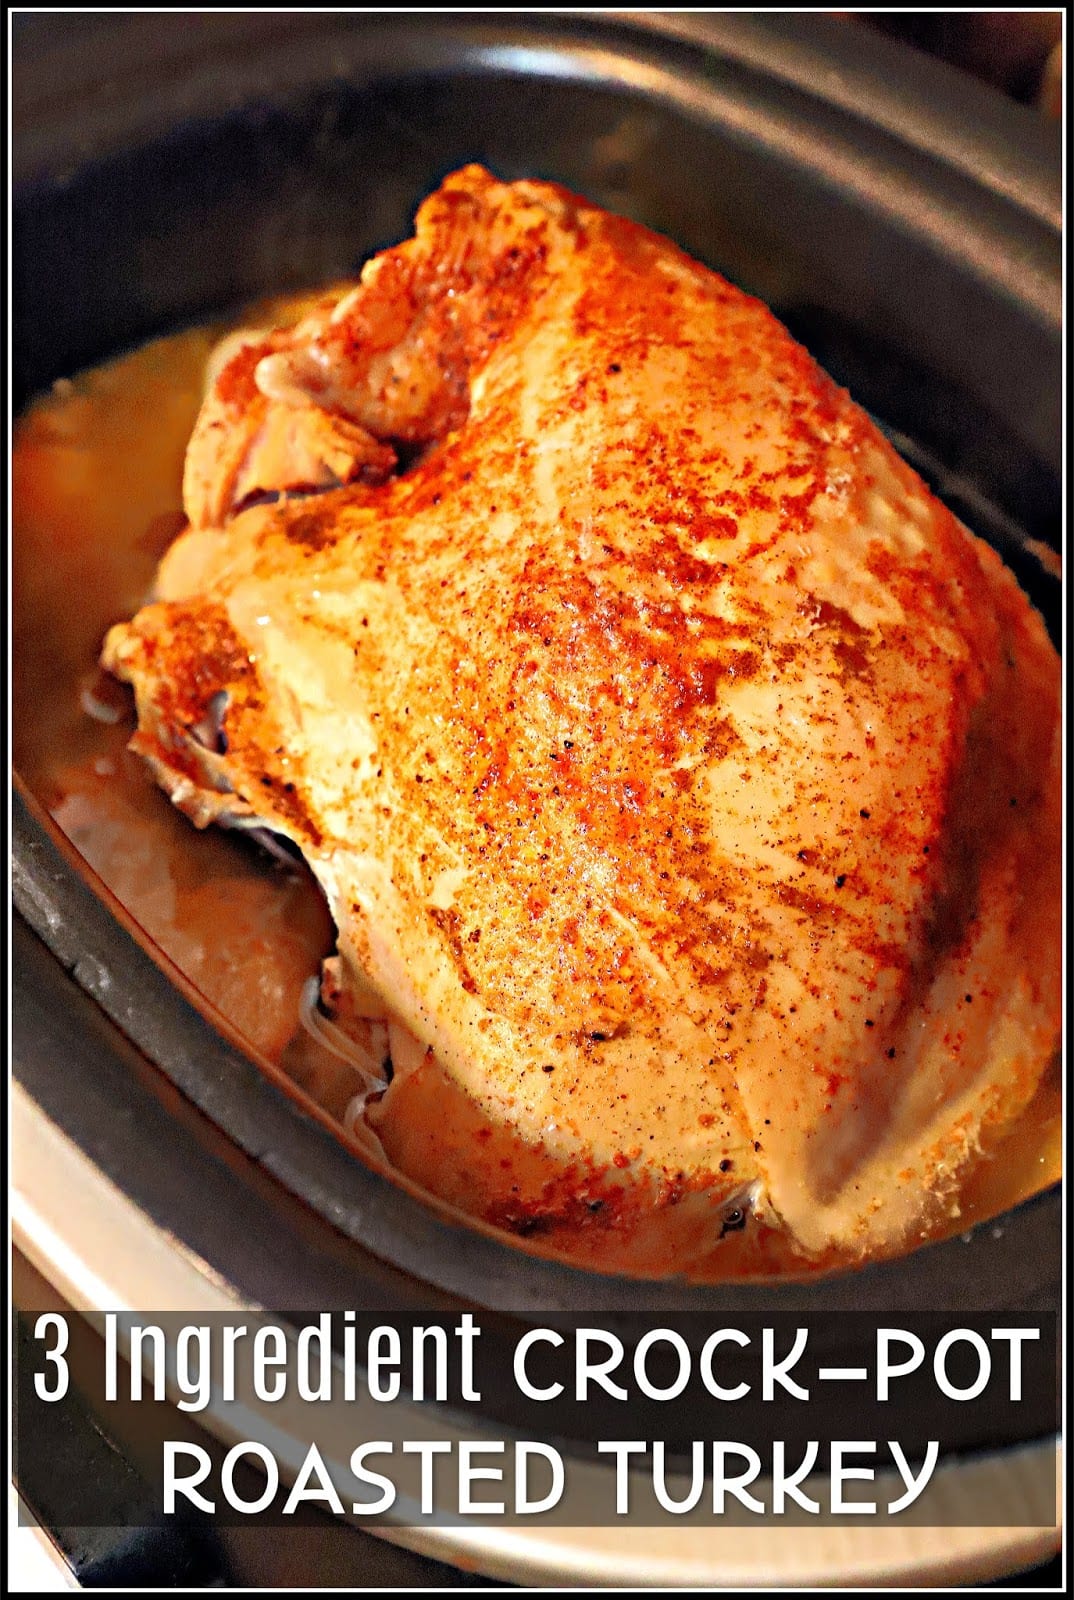 3 Ingredient Crock-Pot Roasted Turkey - For the Love of Food